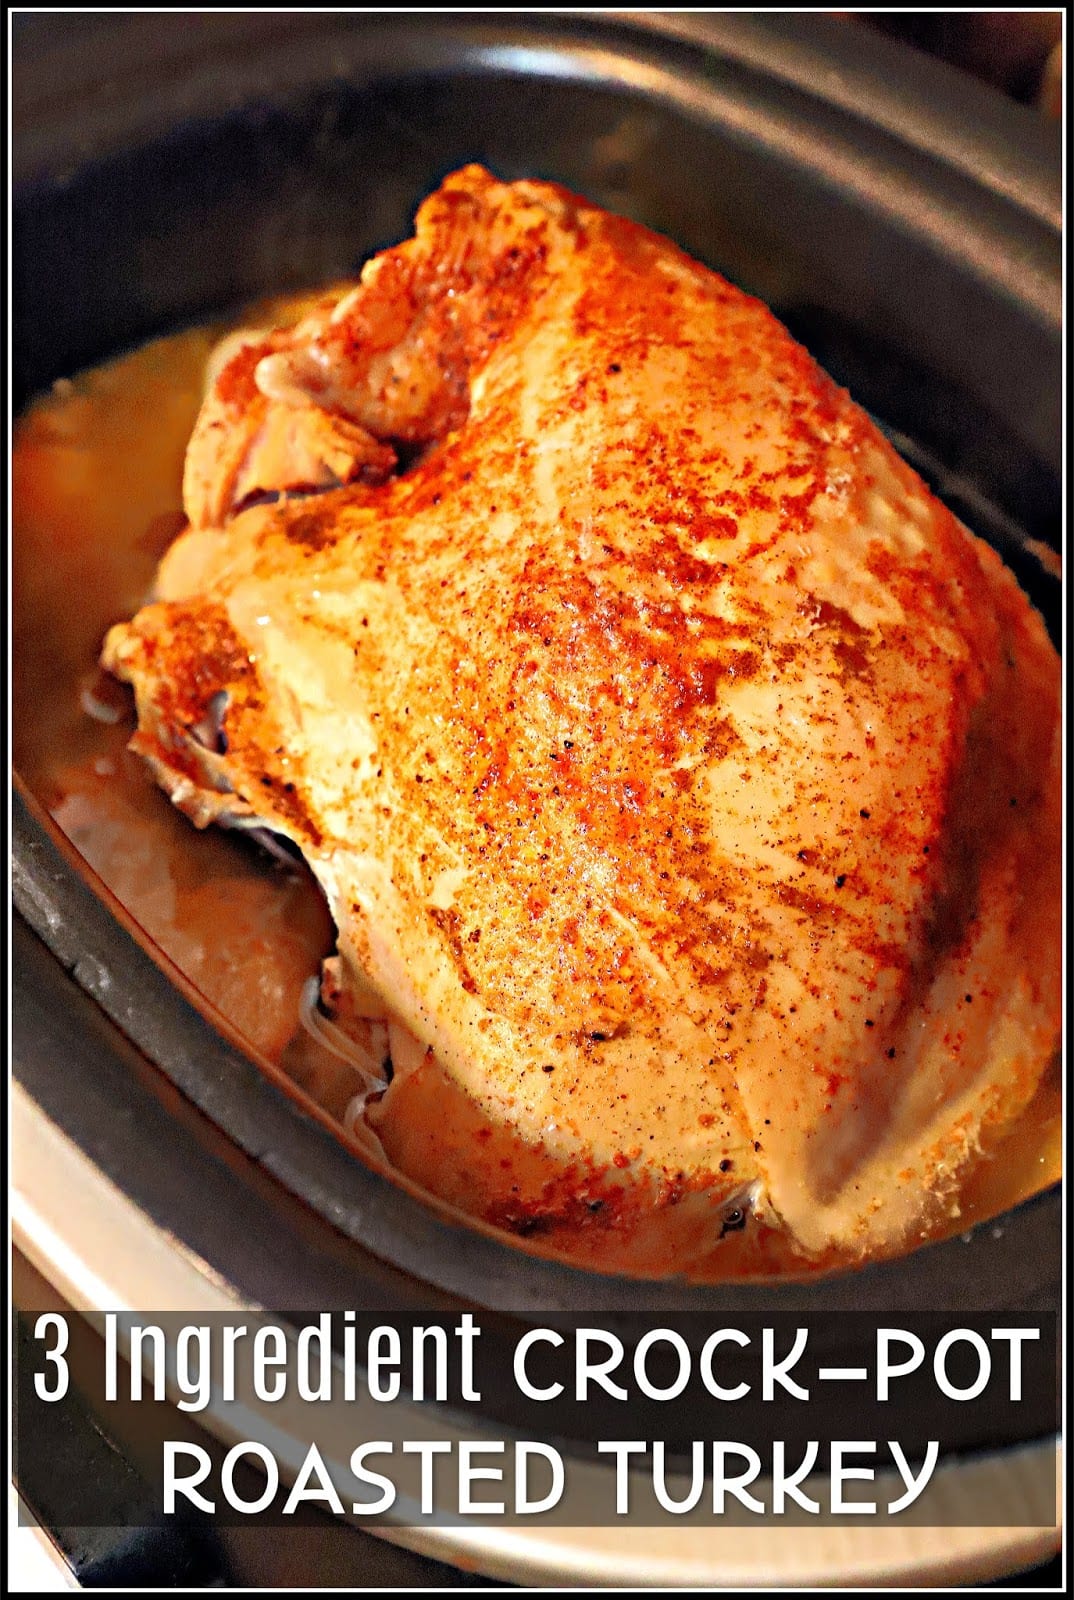 3 Ingredient Crock-Pot Roasted Turkey - For the Love of Food